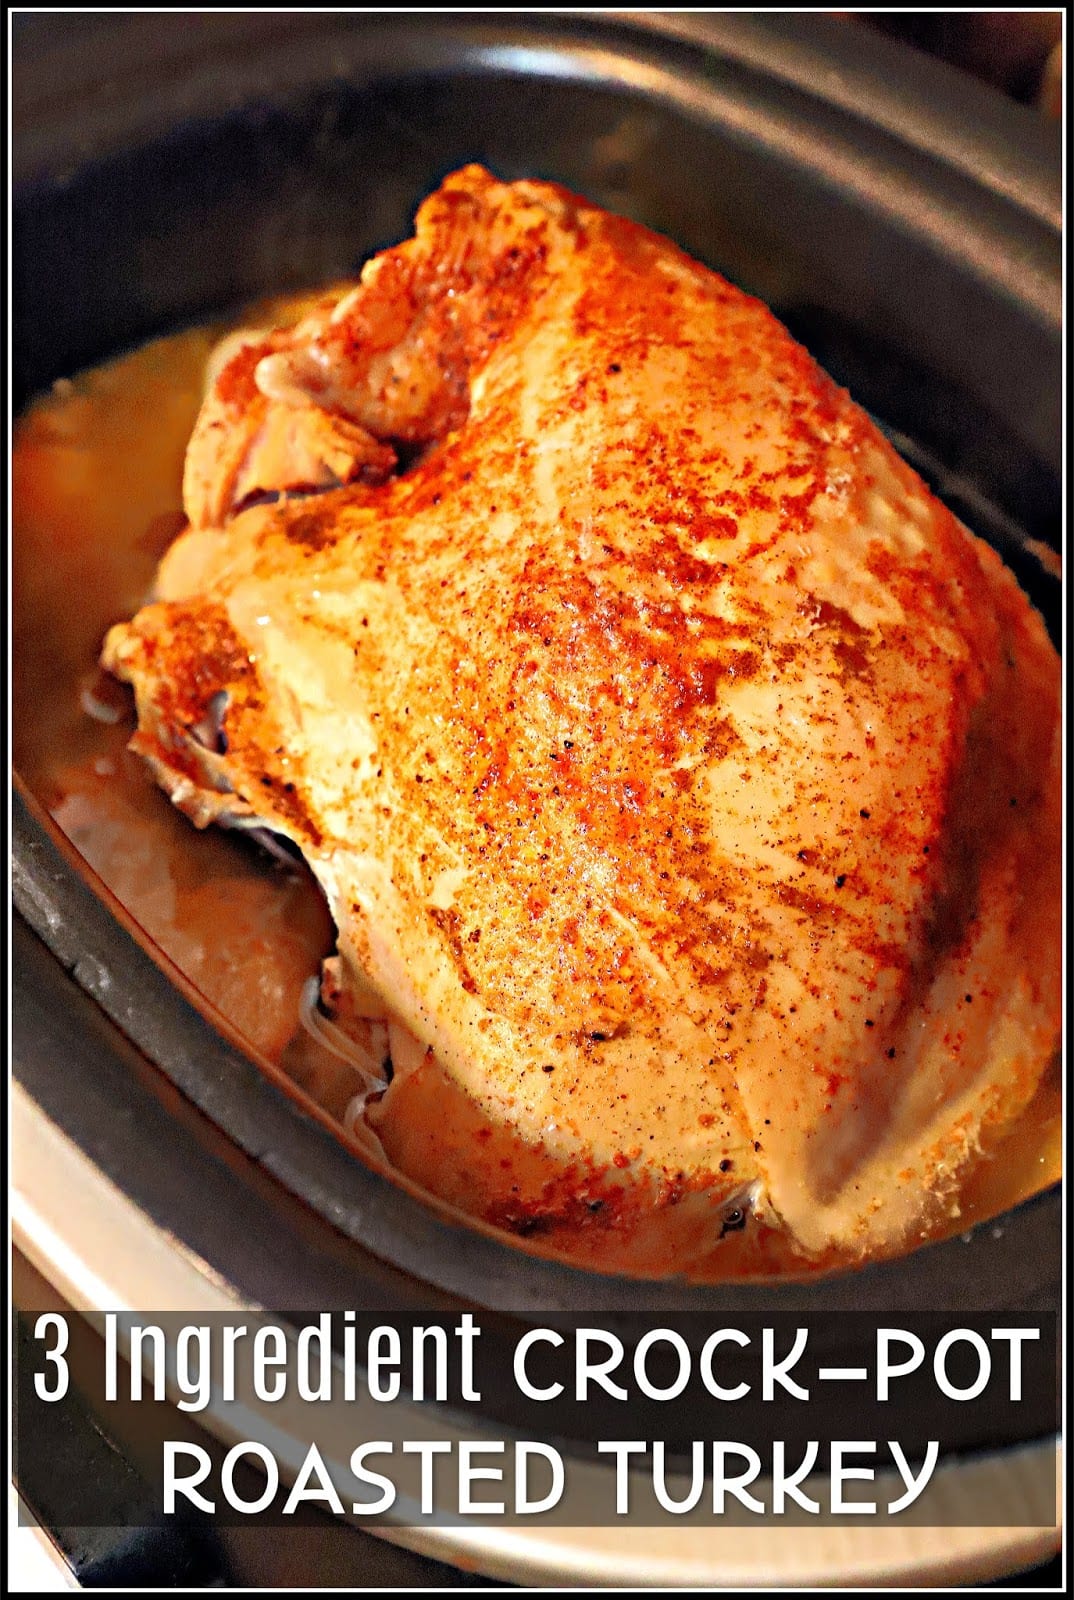 3 Ingredient Crock-Pot Roasted Turkey - For the Love of Food